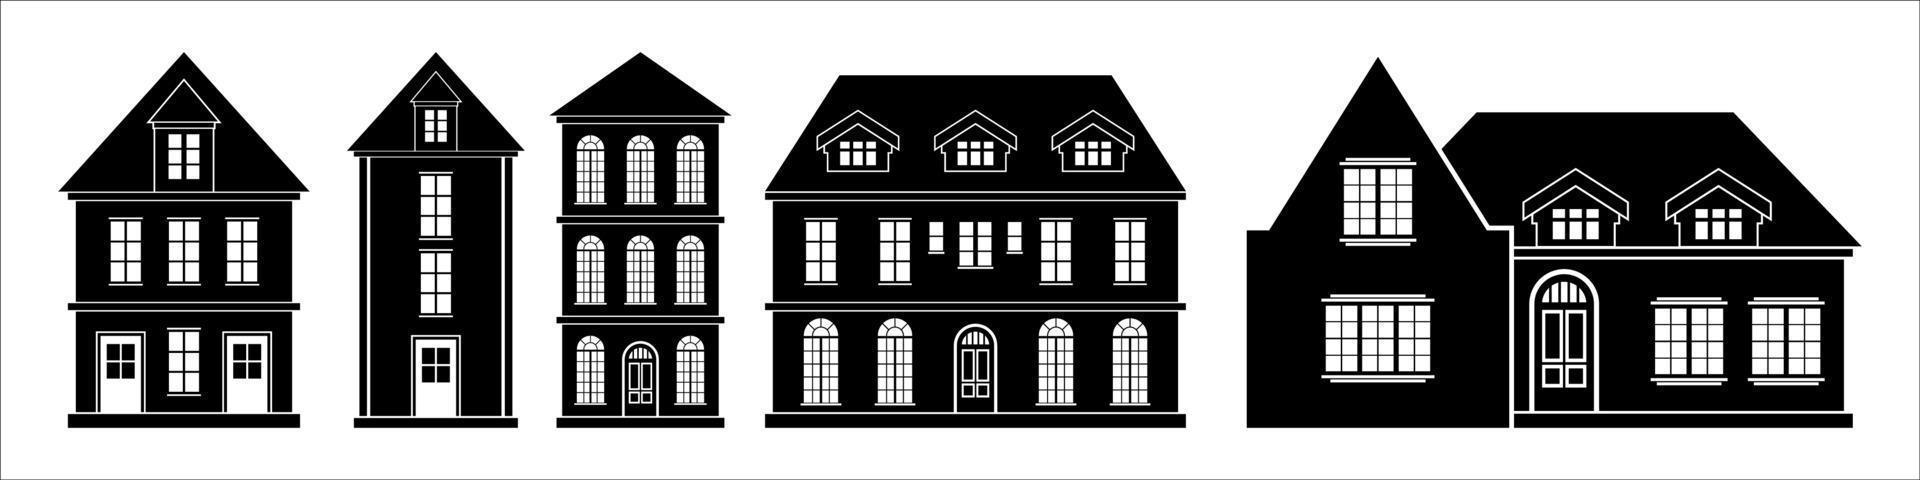 House silhouette, black home vector on white background, for real estate architecture design